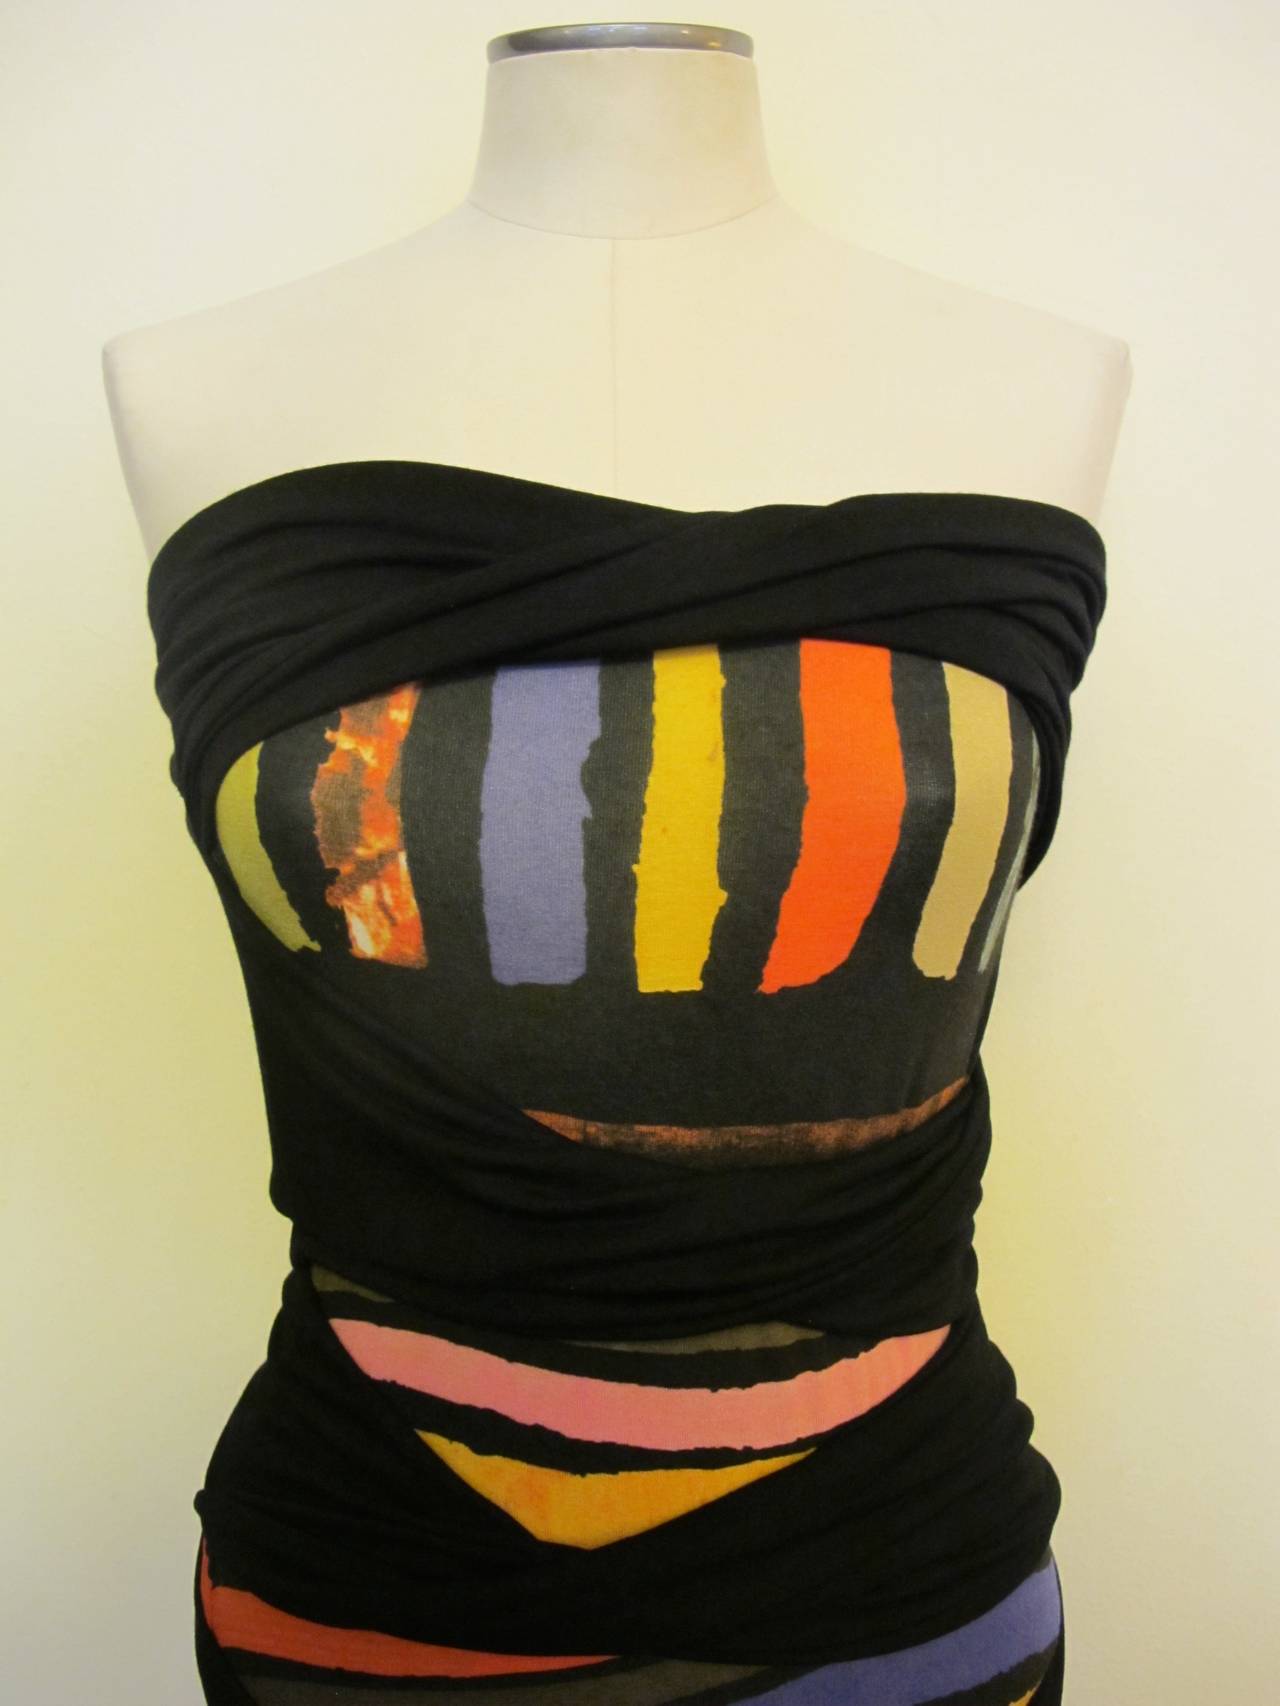 Paul Smith Strapless Body Con Dress In Excellent Condition For Sale In San Francisco, CA